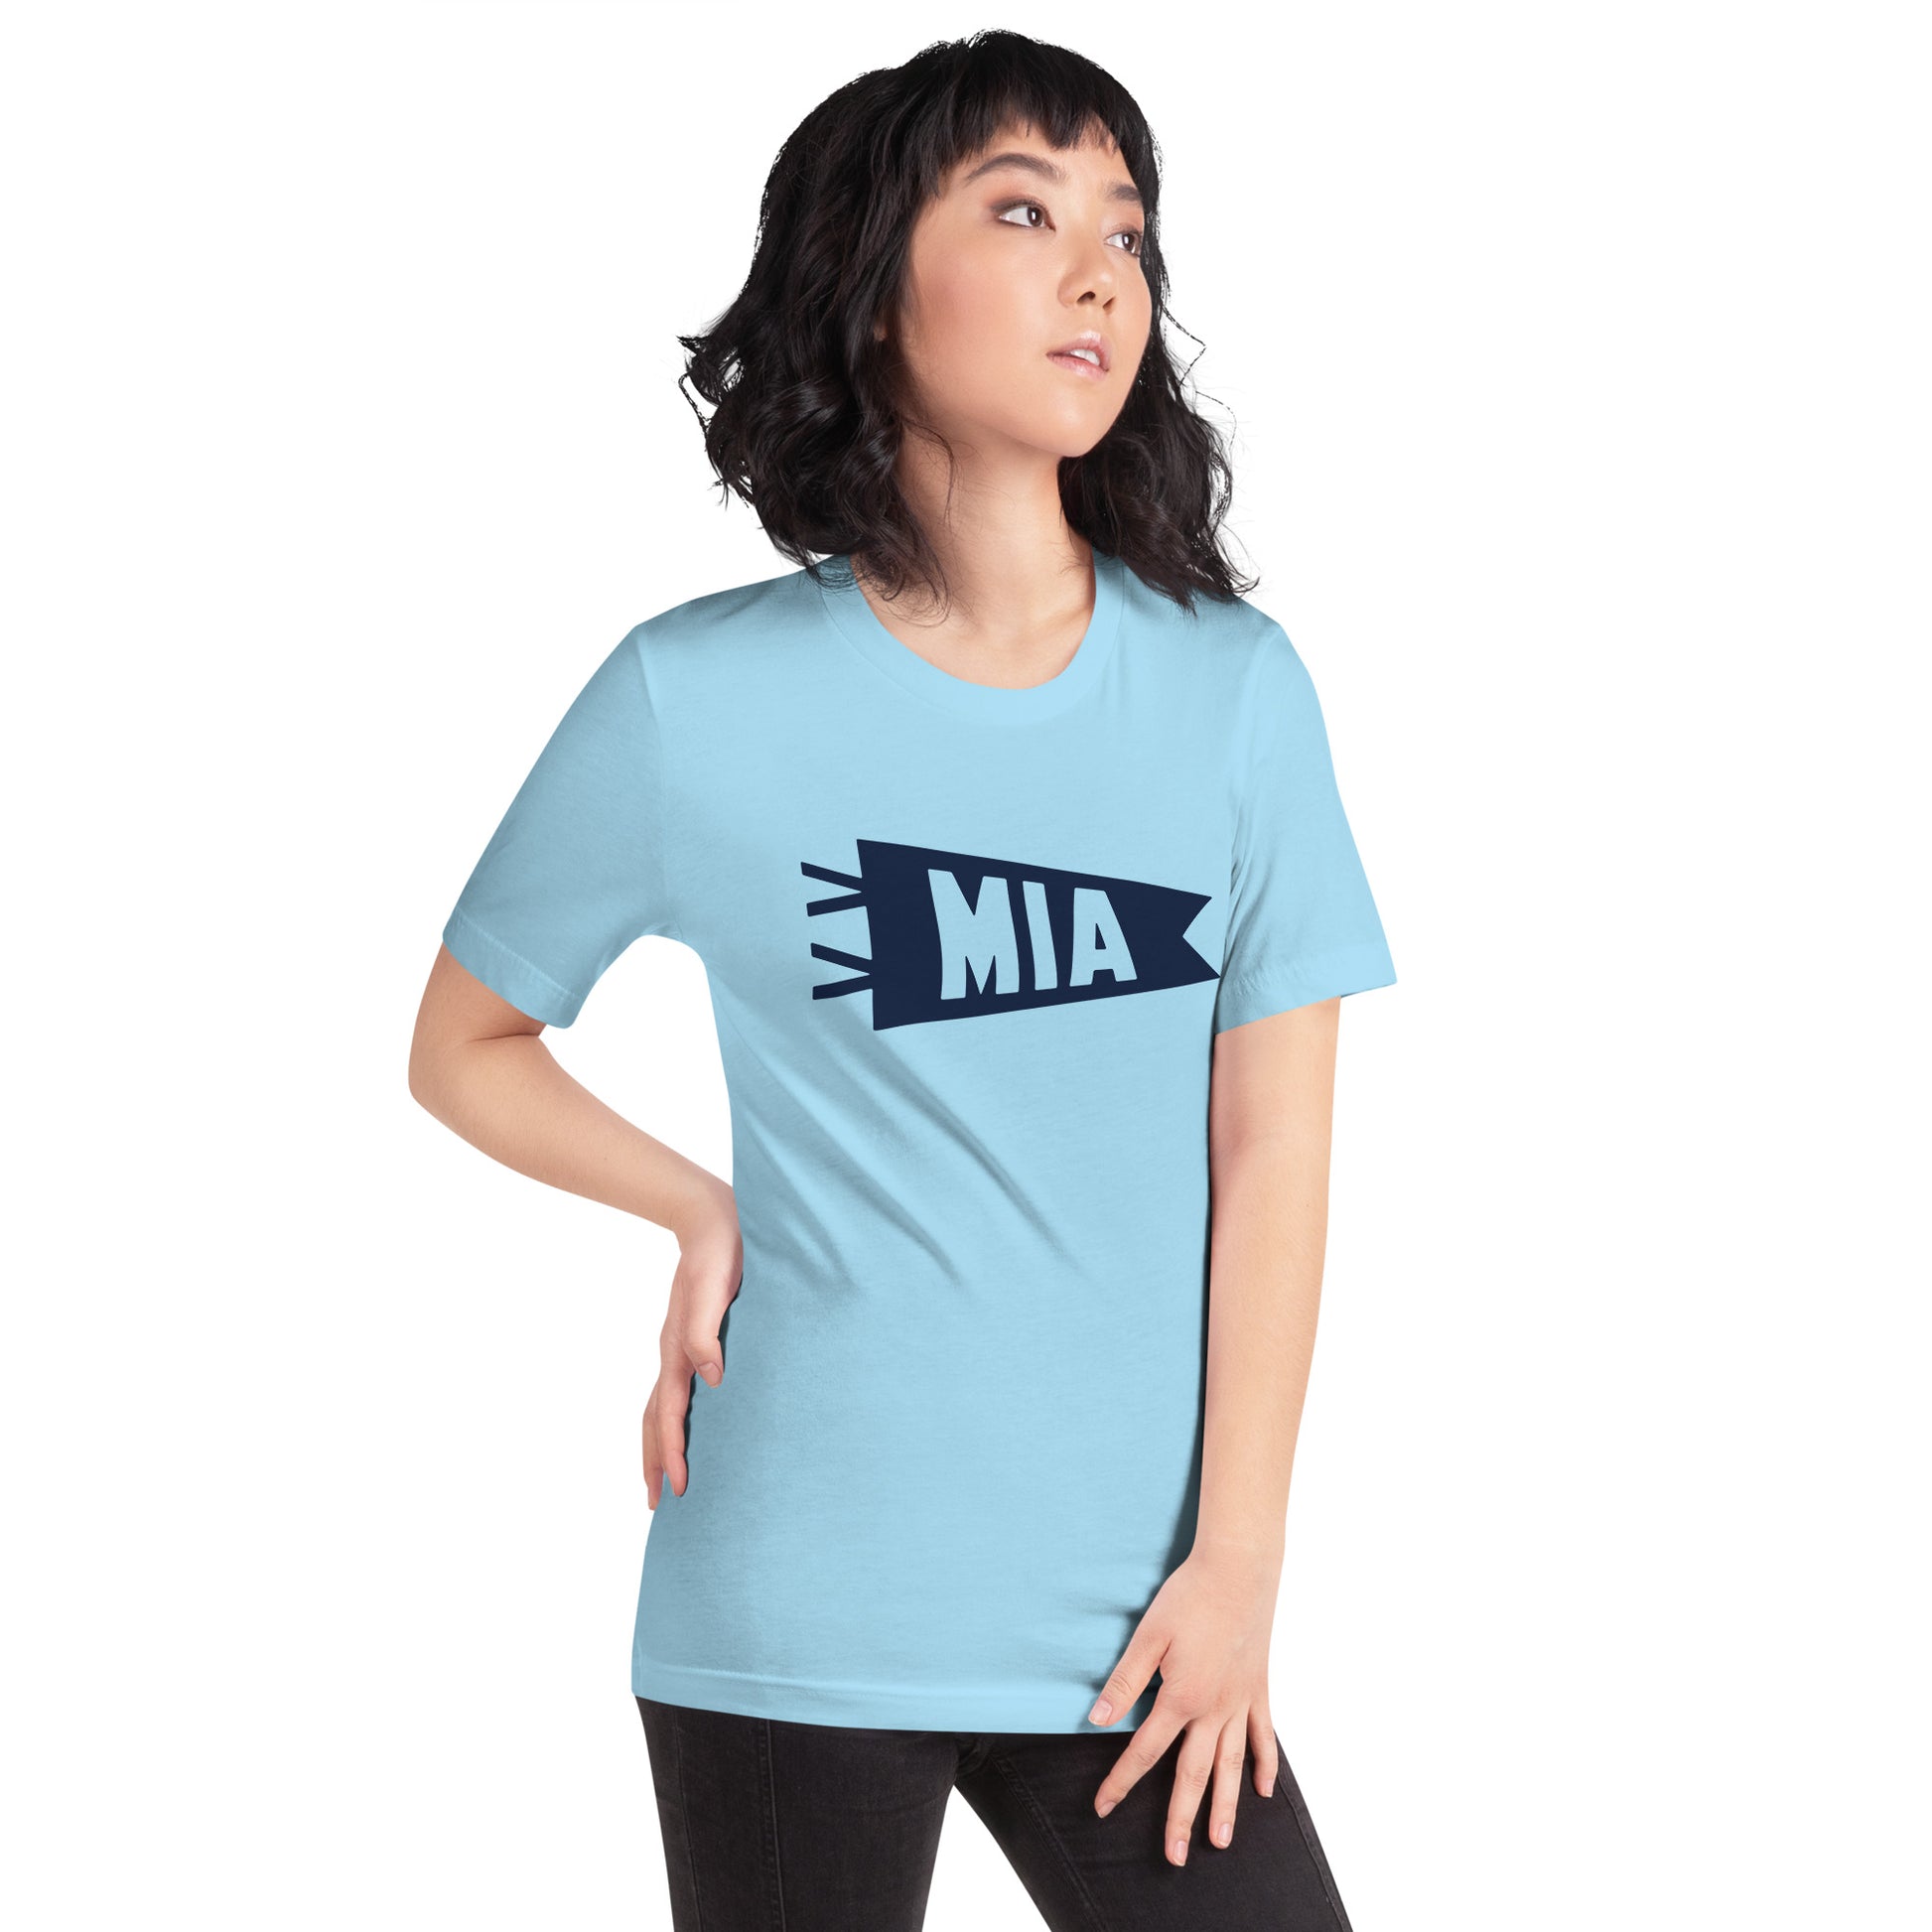 Airport Code T-Shirt - Navy Blue Graphic • MIA Miami • YHM Designs - Image 07